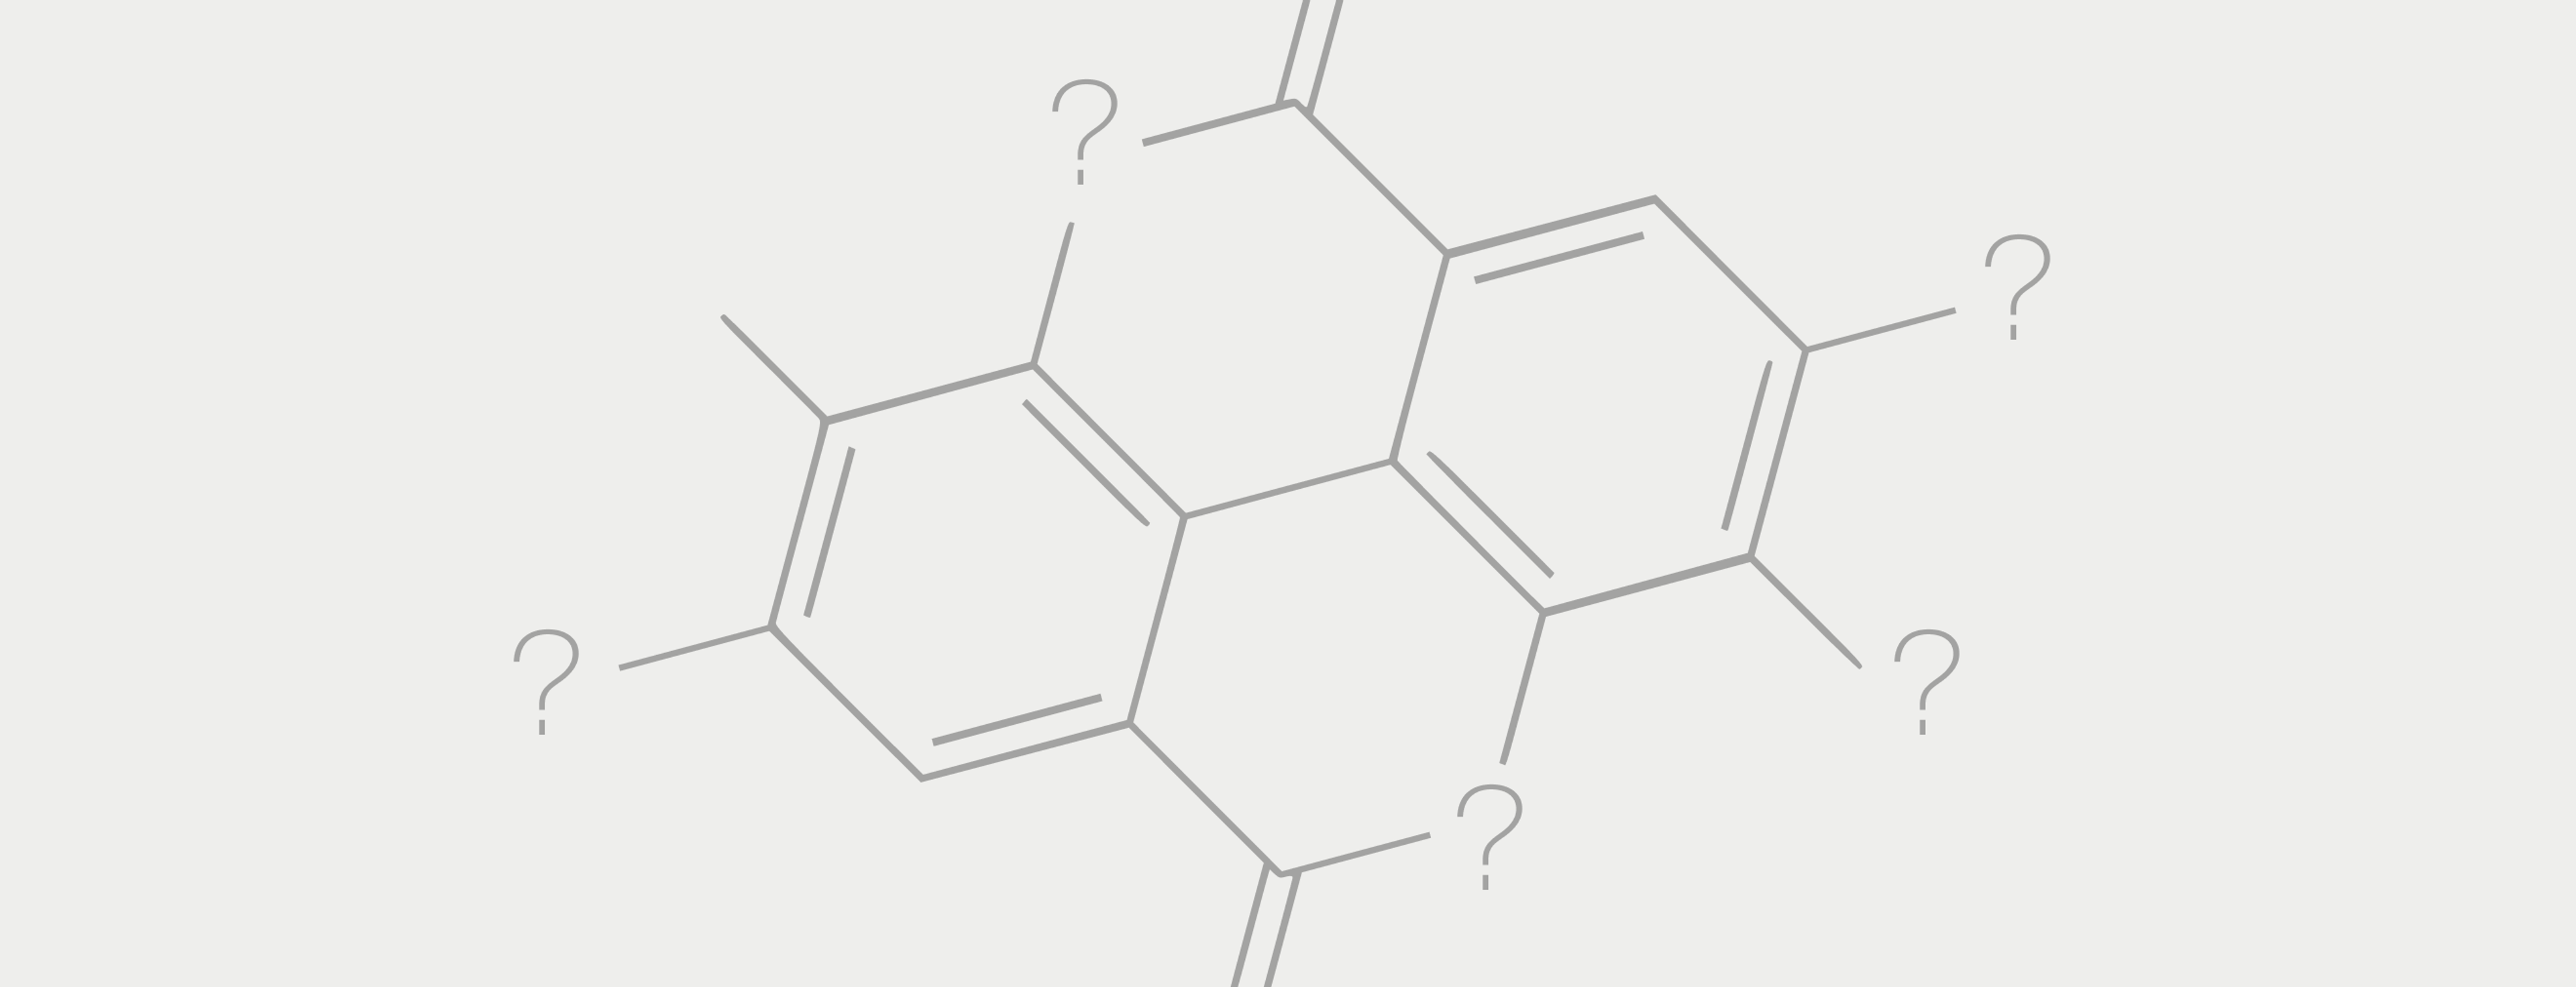 Polyphenol molecule with it's elements replaced by question marks